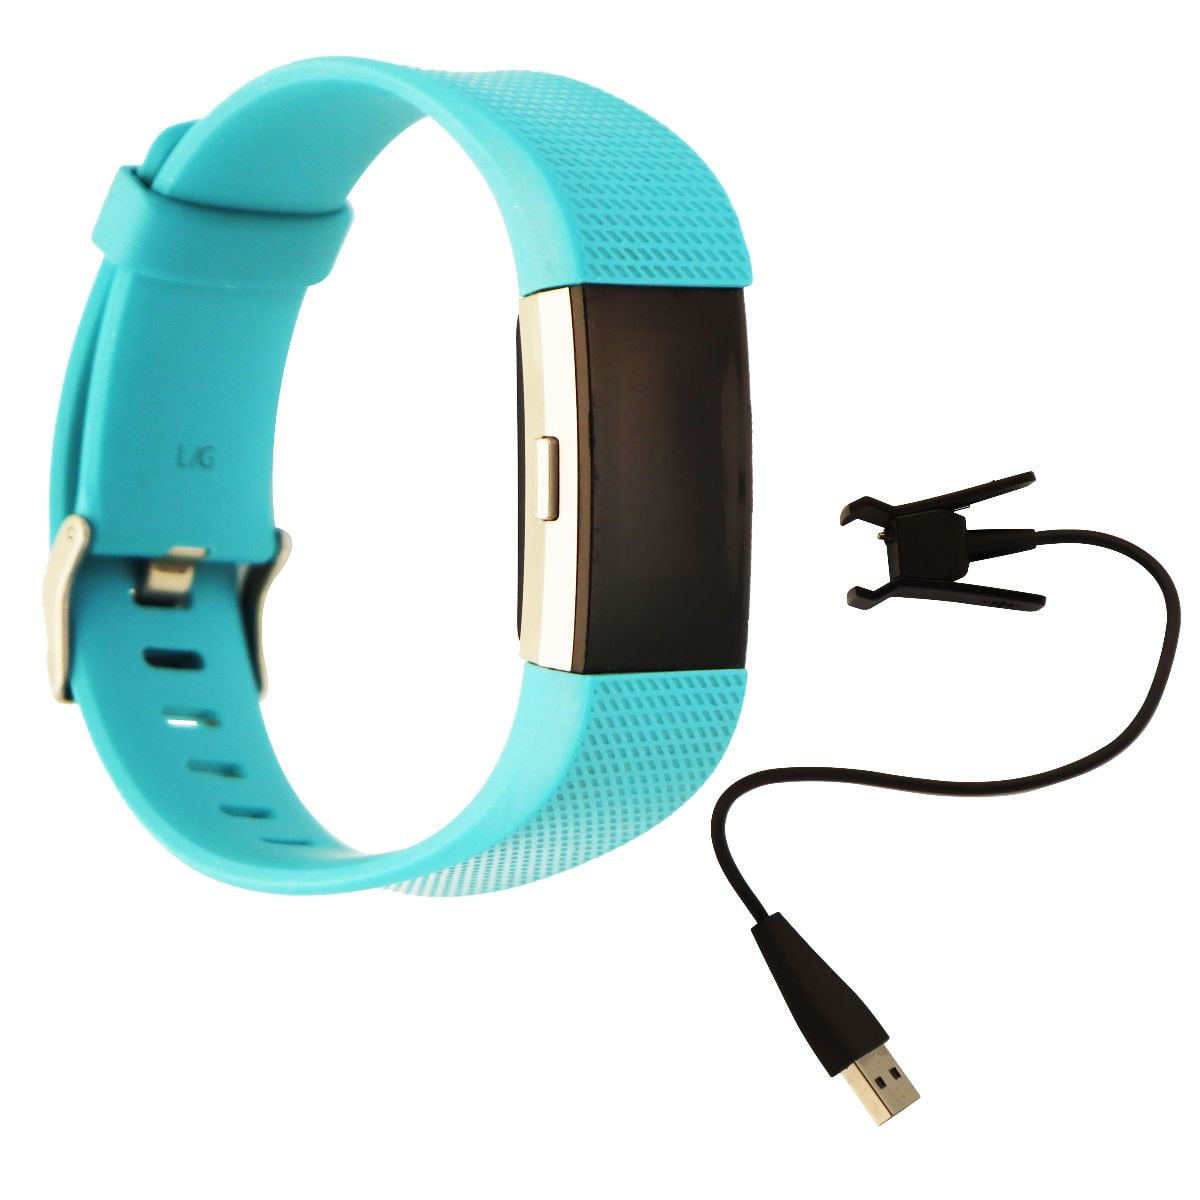 Fitbit Charge 2 Heart Rate Monitor Fitness Activity Tracker Small Large Teal 